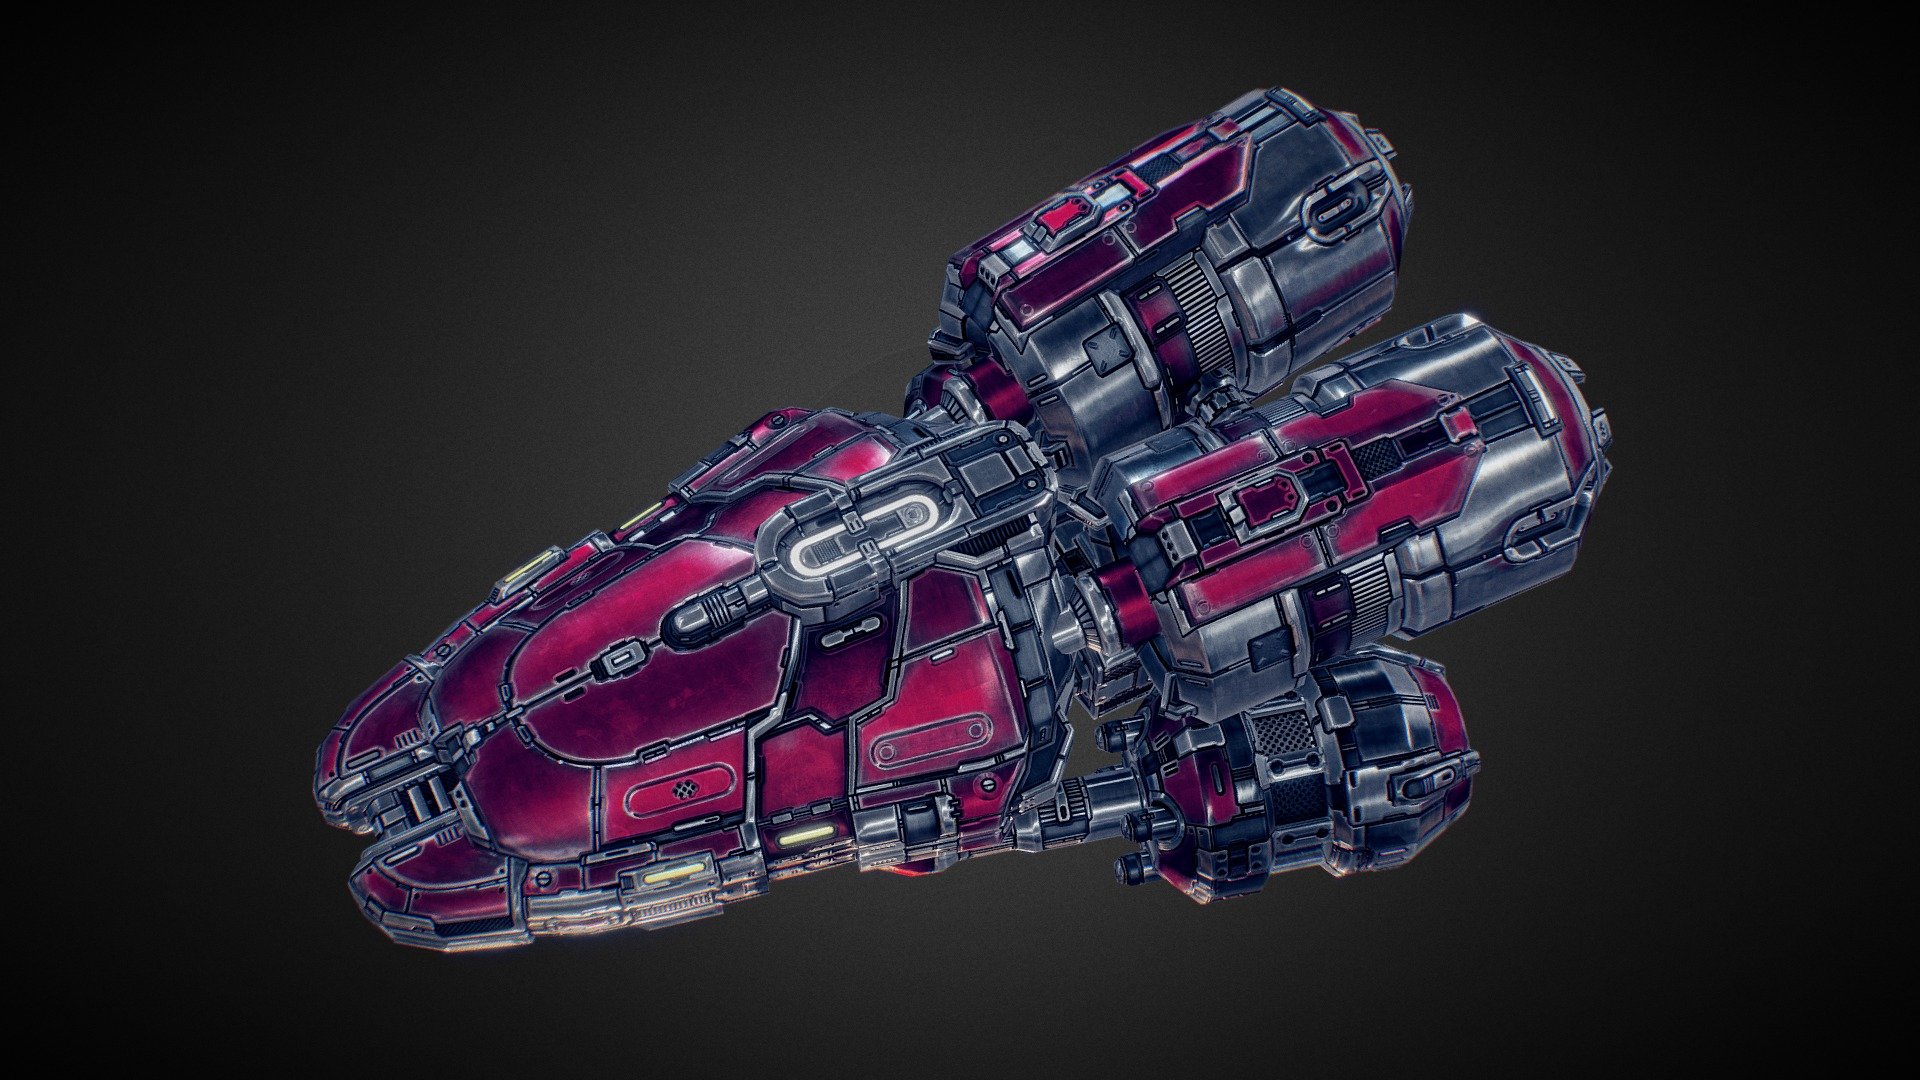 In-game model of a medium spaceship belonging to the Vanguard faction.
Learn more about the game at http://starfalltactics.com/ - Starfall Tactics — Curtana Vanguard b.cruiser - 3D model by Snowforged Entertainment (@snowforged) 3d model